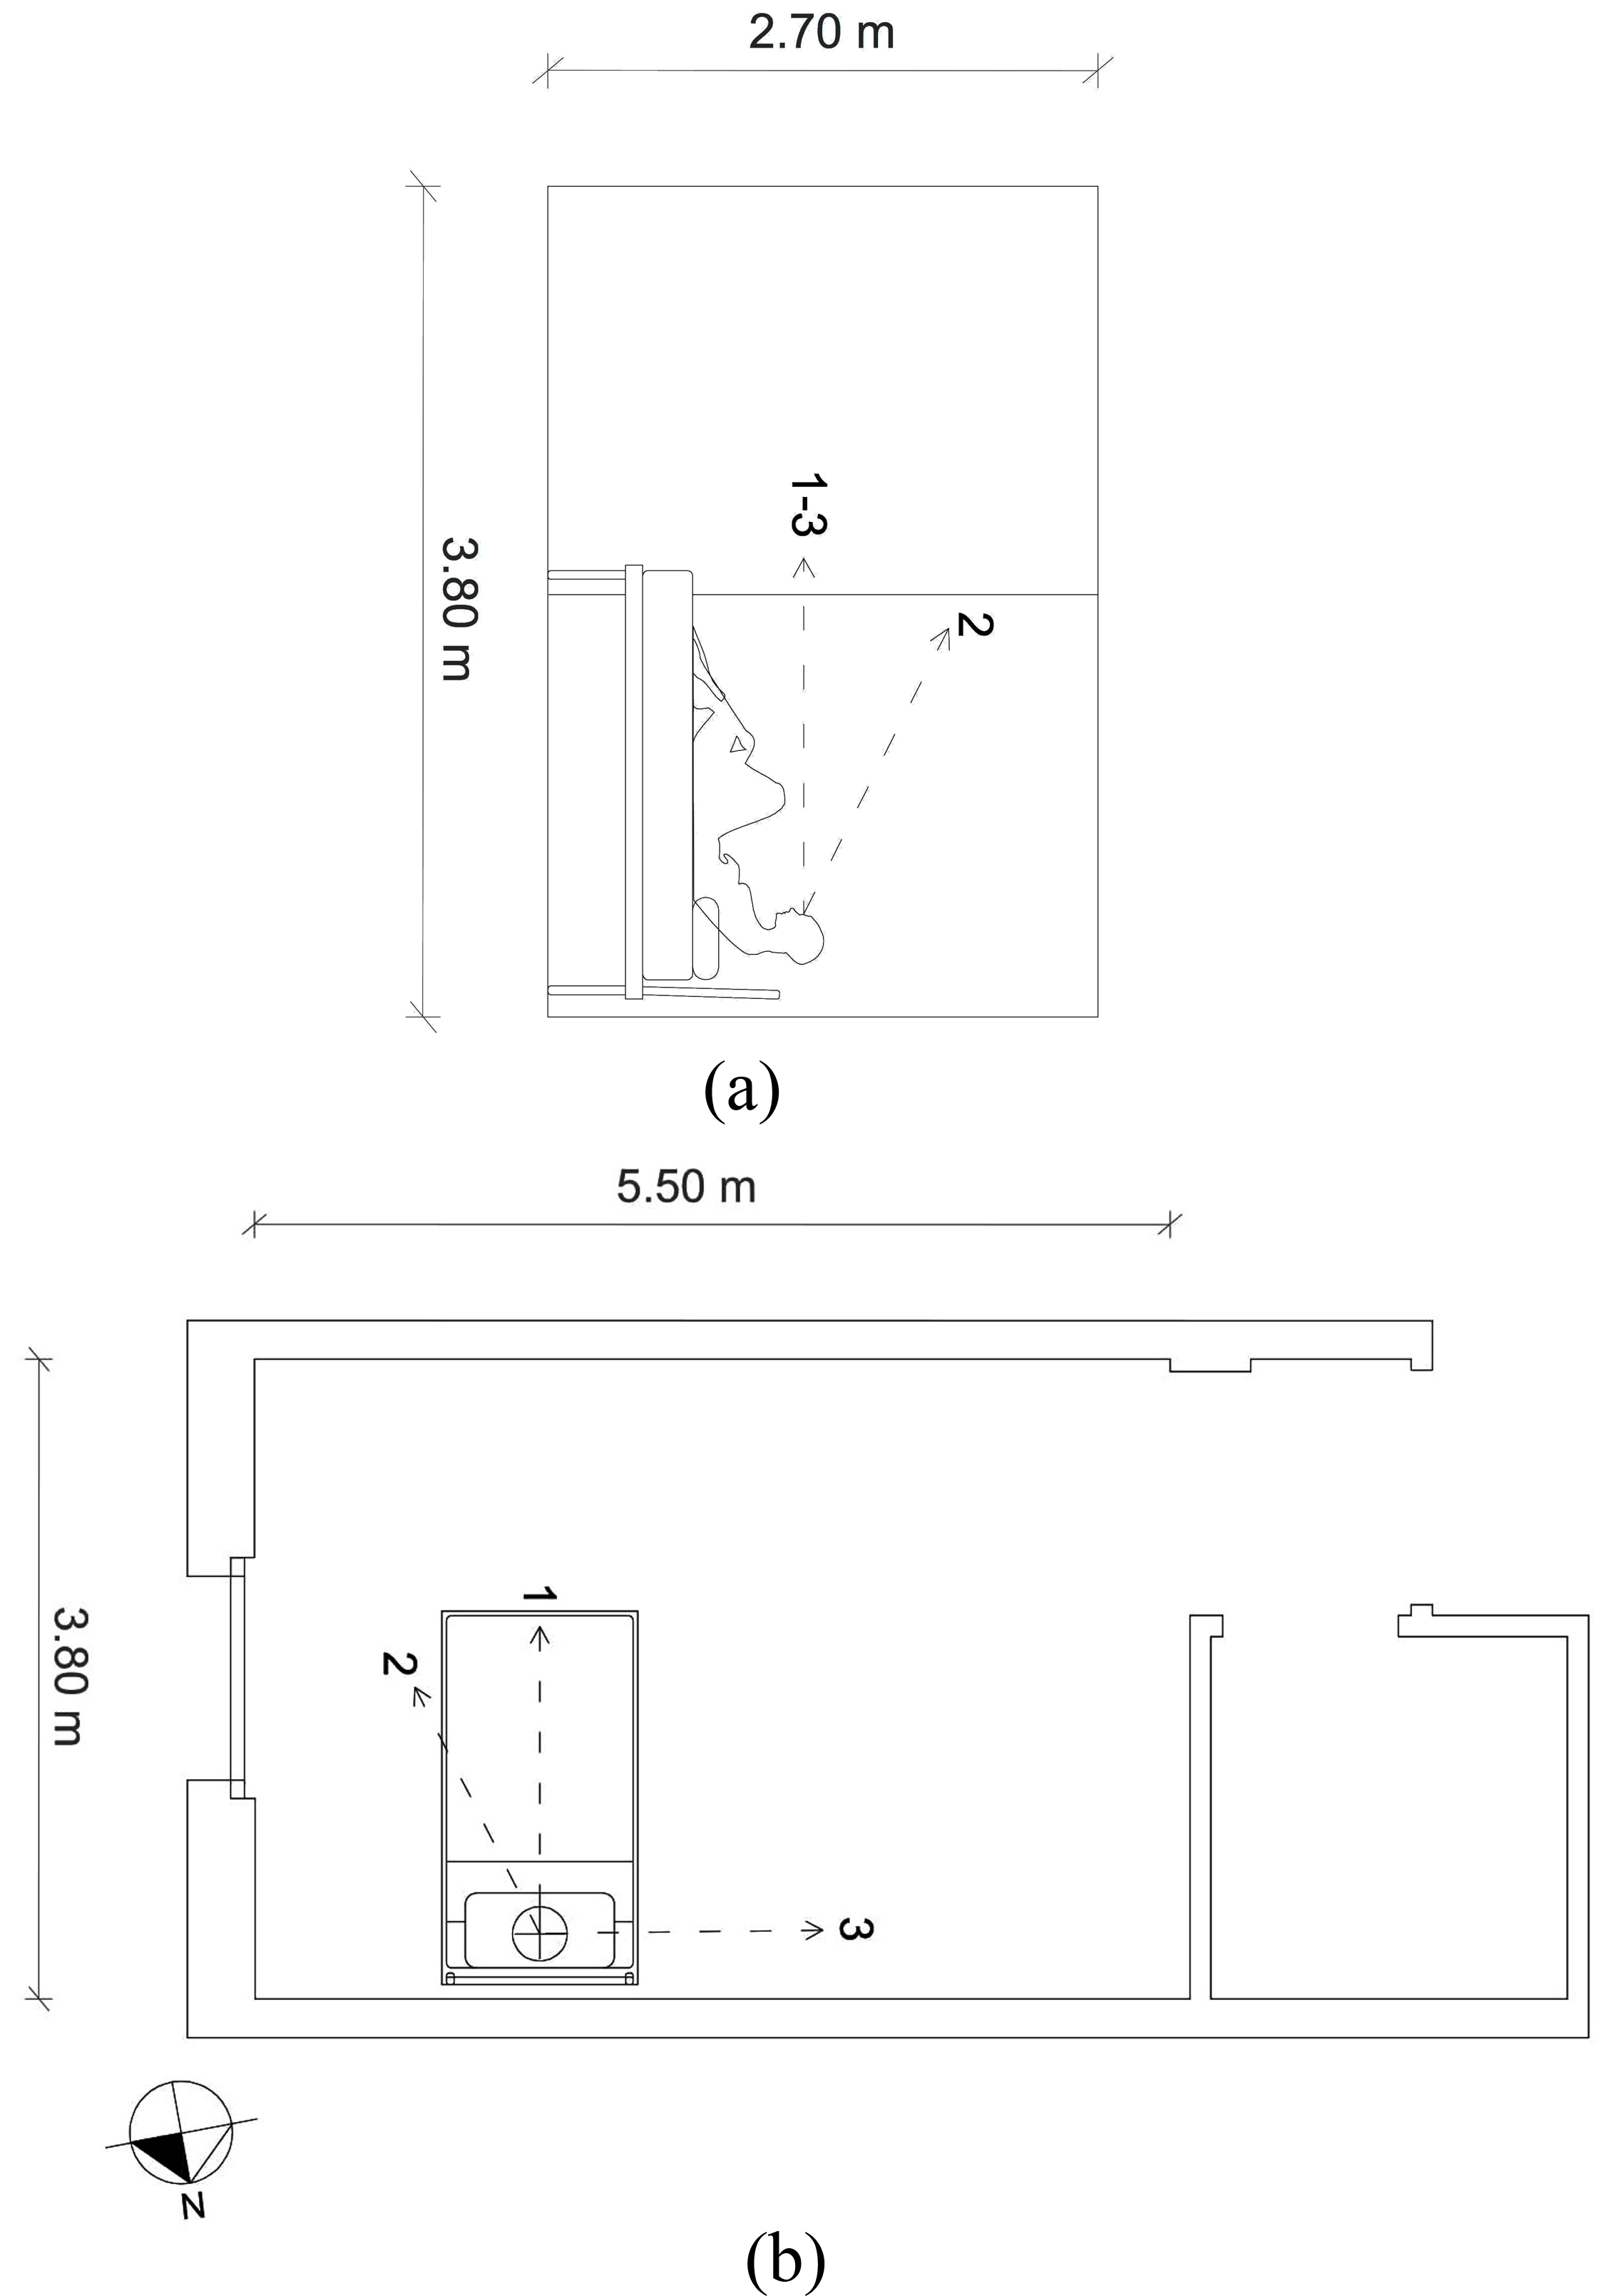 Graphical drawings for Patient room: (a) section and (b) plan with allocation and placement of points of view for camera for simulation output.